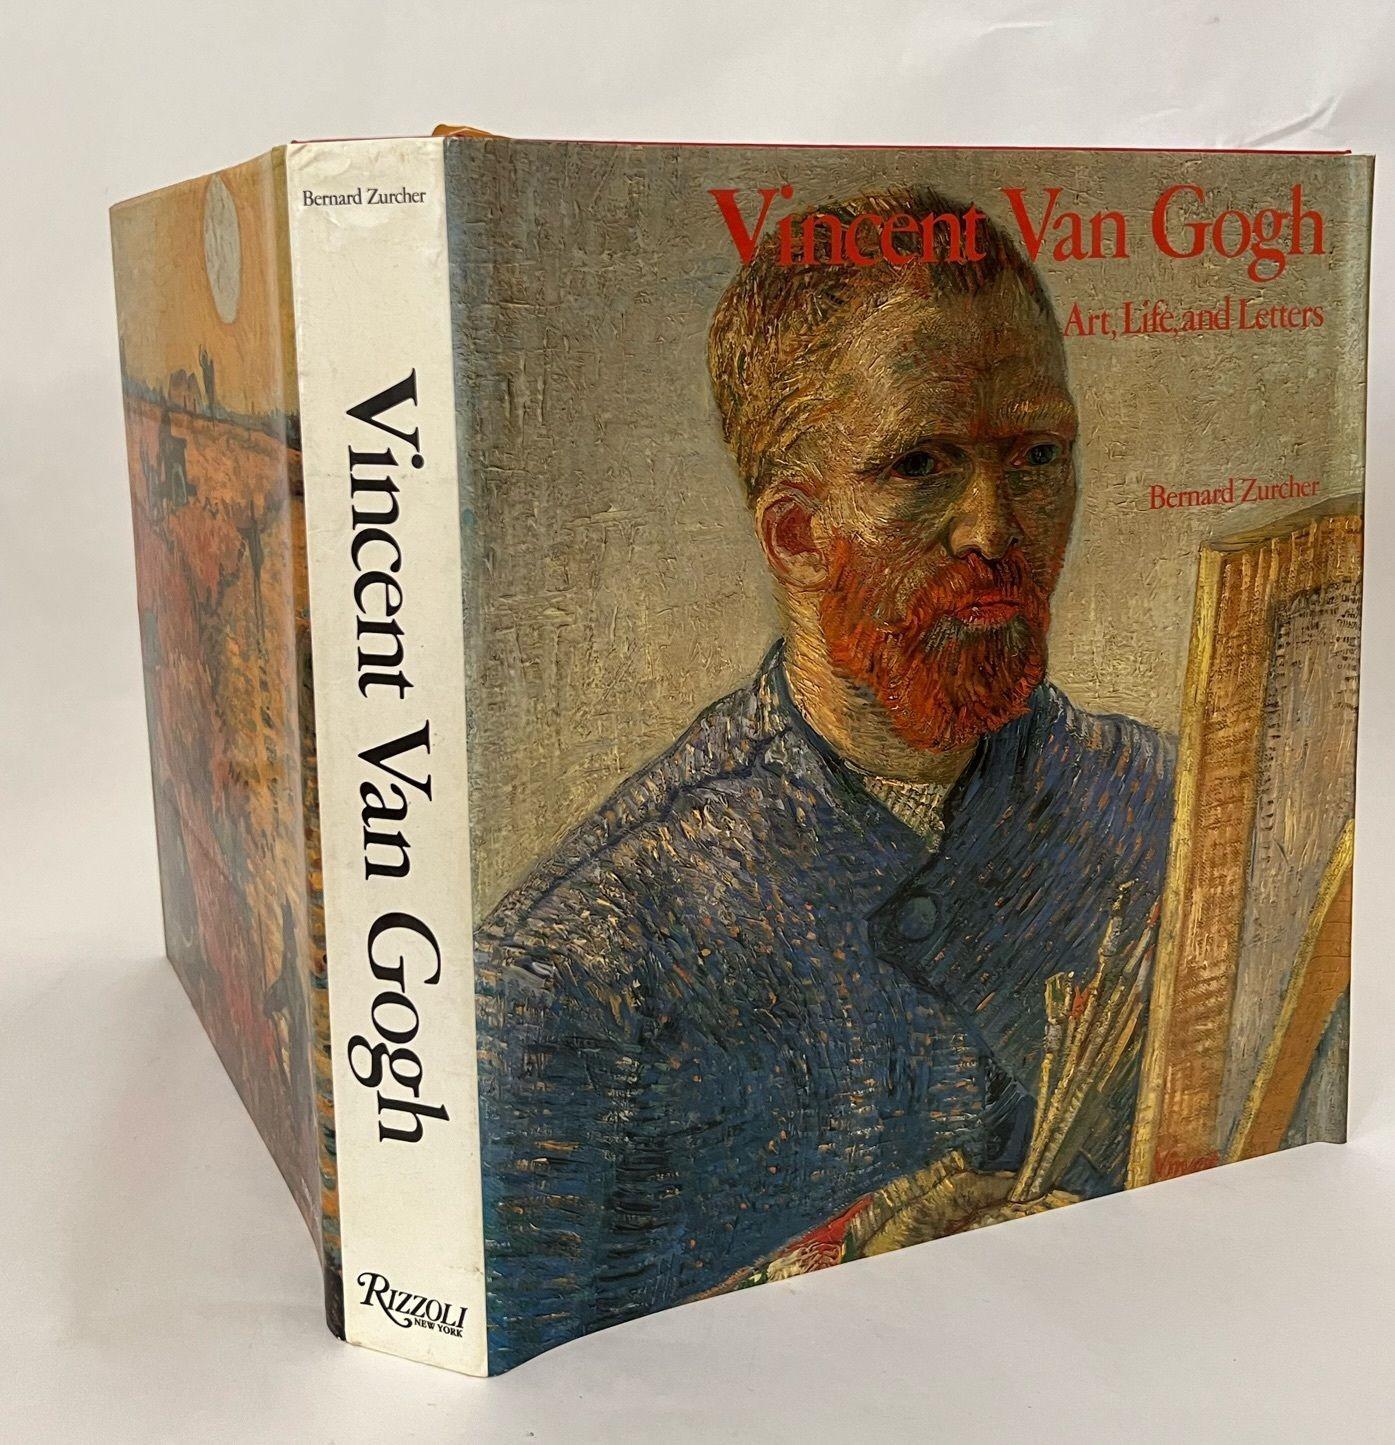 1985 Vincent Van Gogh Art Life and Letters by Bernard Zucker, published by Rizzli.Large hardcover coffee table art book.Translated from the french edition.
* Language ‏ : ‎ English
* Hardcover ‏ : ‎ 325 pages
* Item Weight ‏ : ‎ 5.3 pounds
*